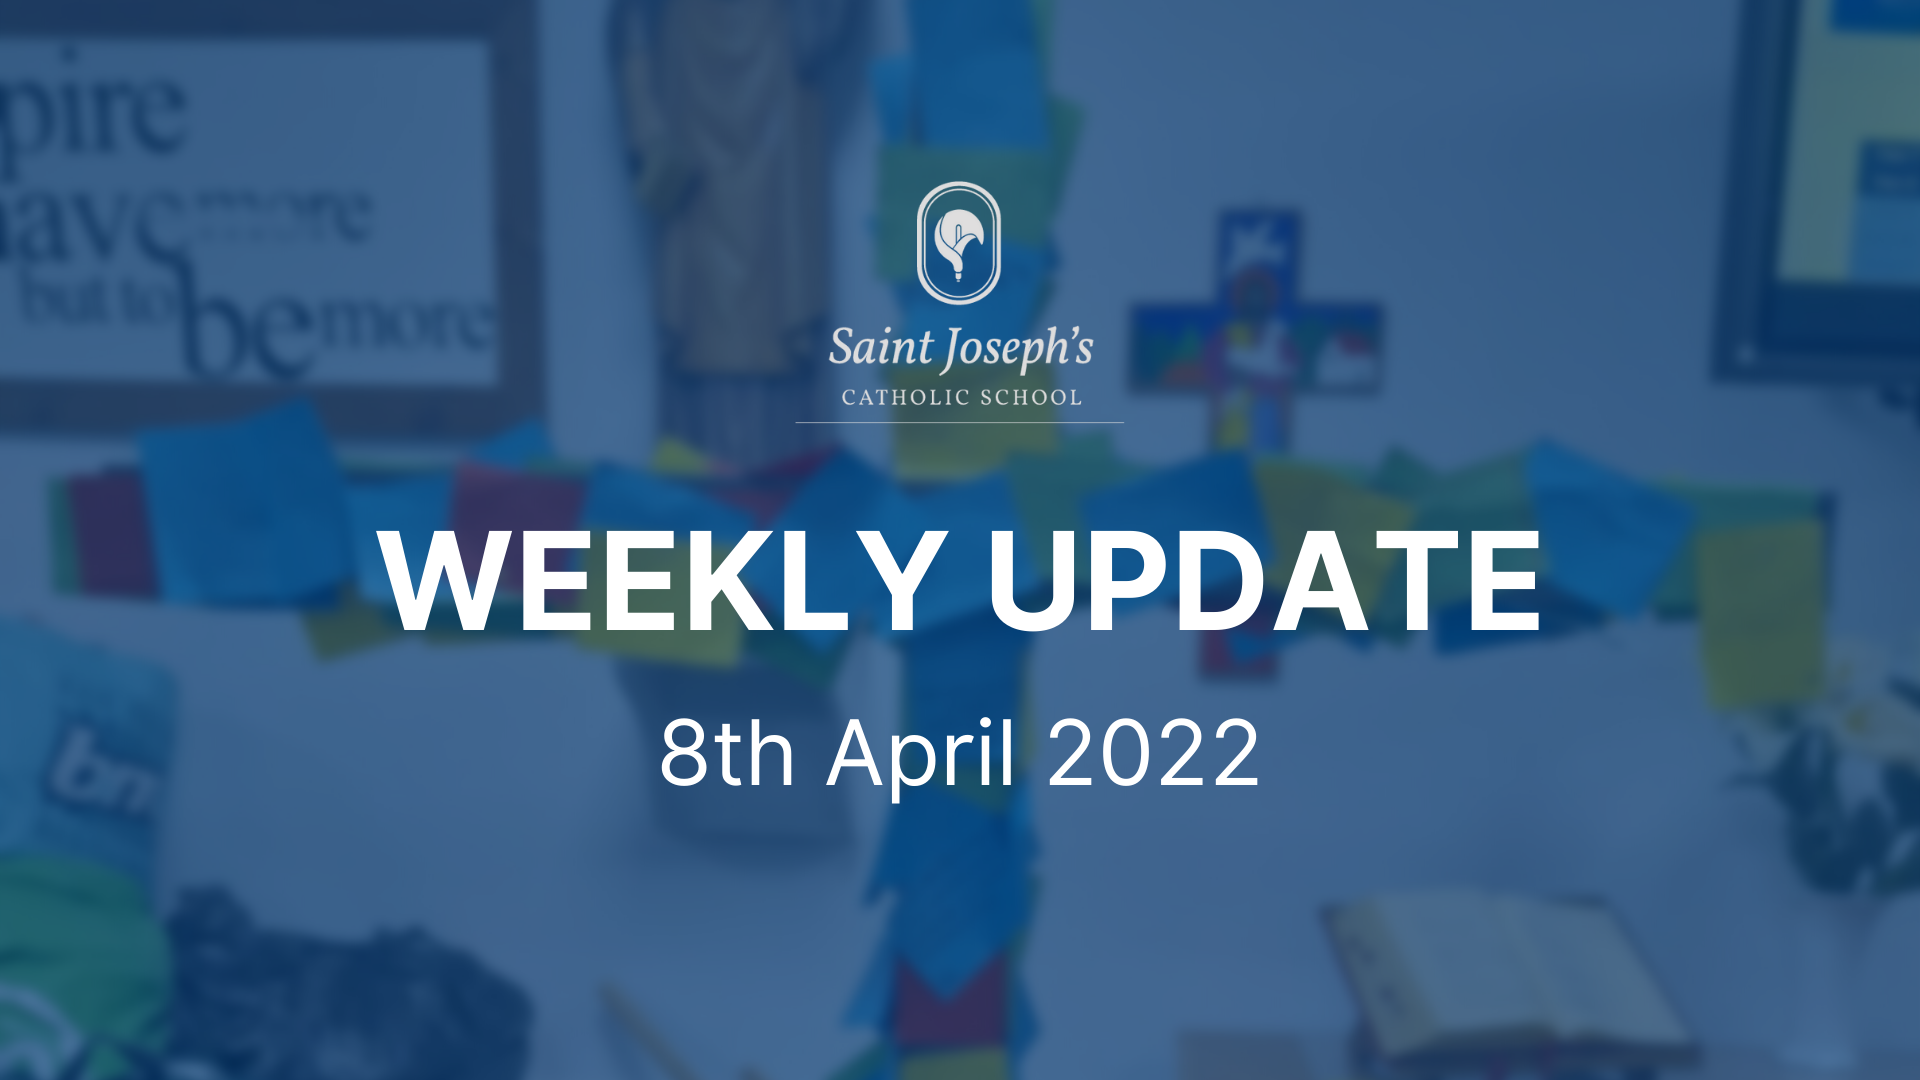 Featured image for “Weekly Update: 8th April 2022”